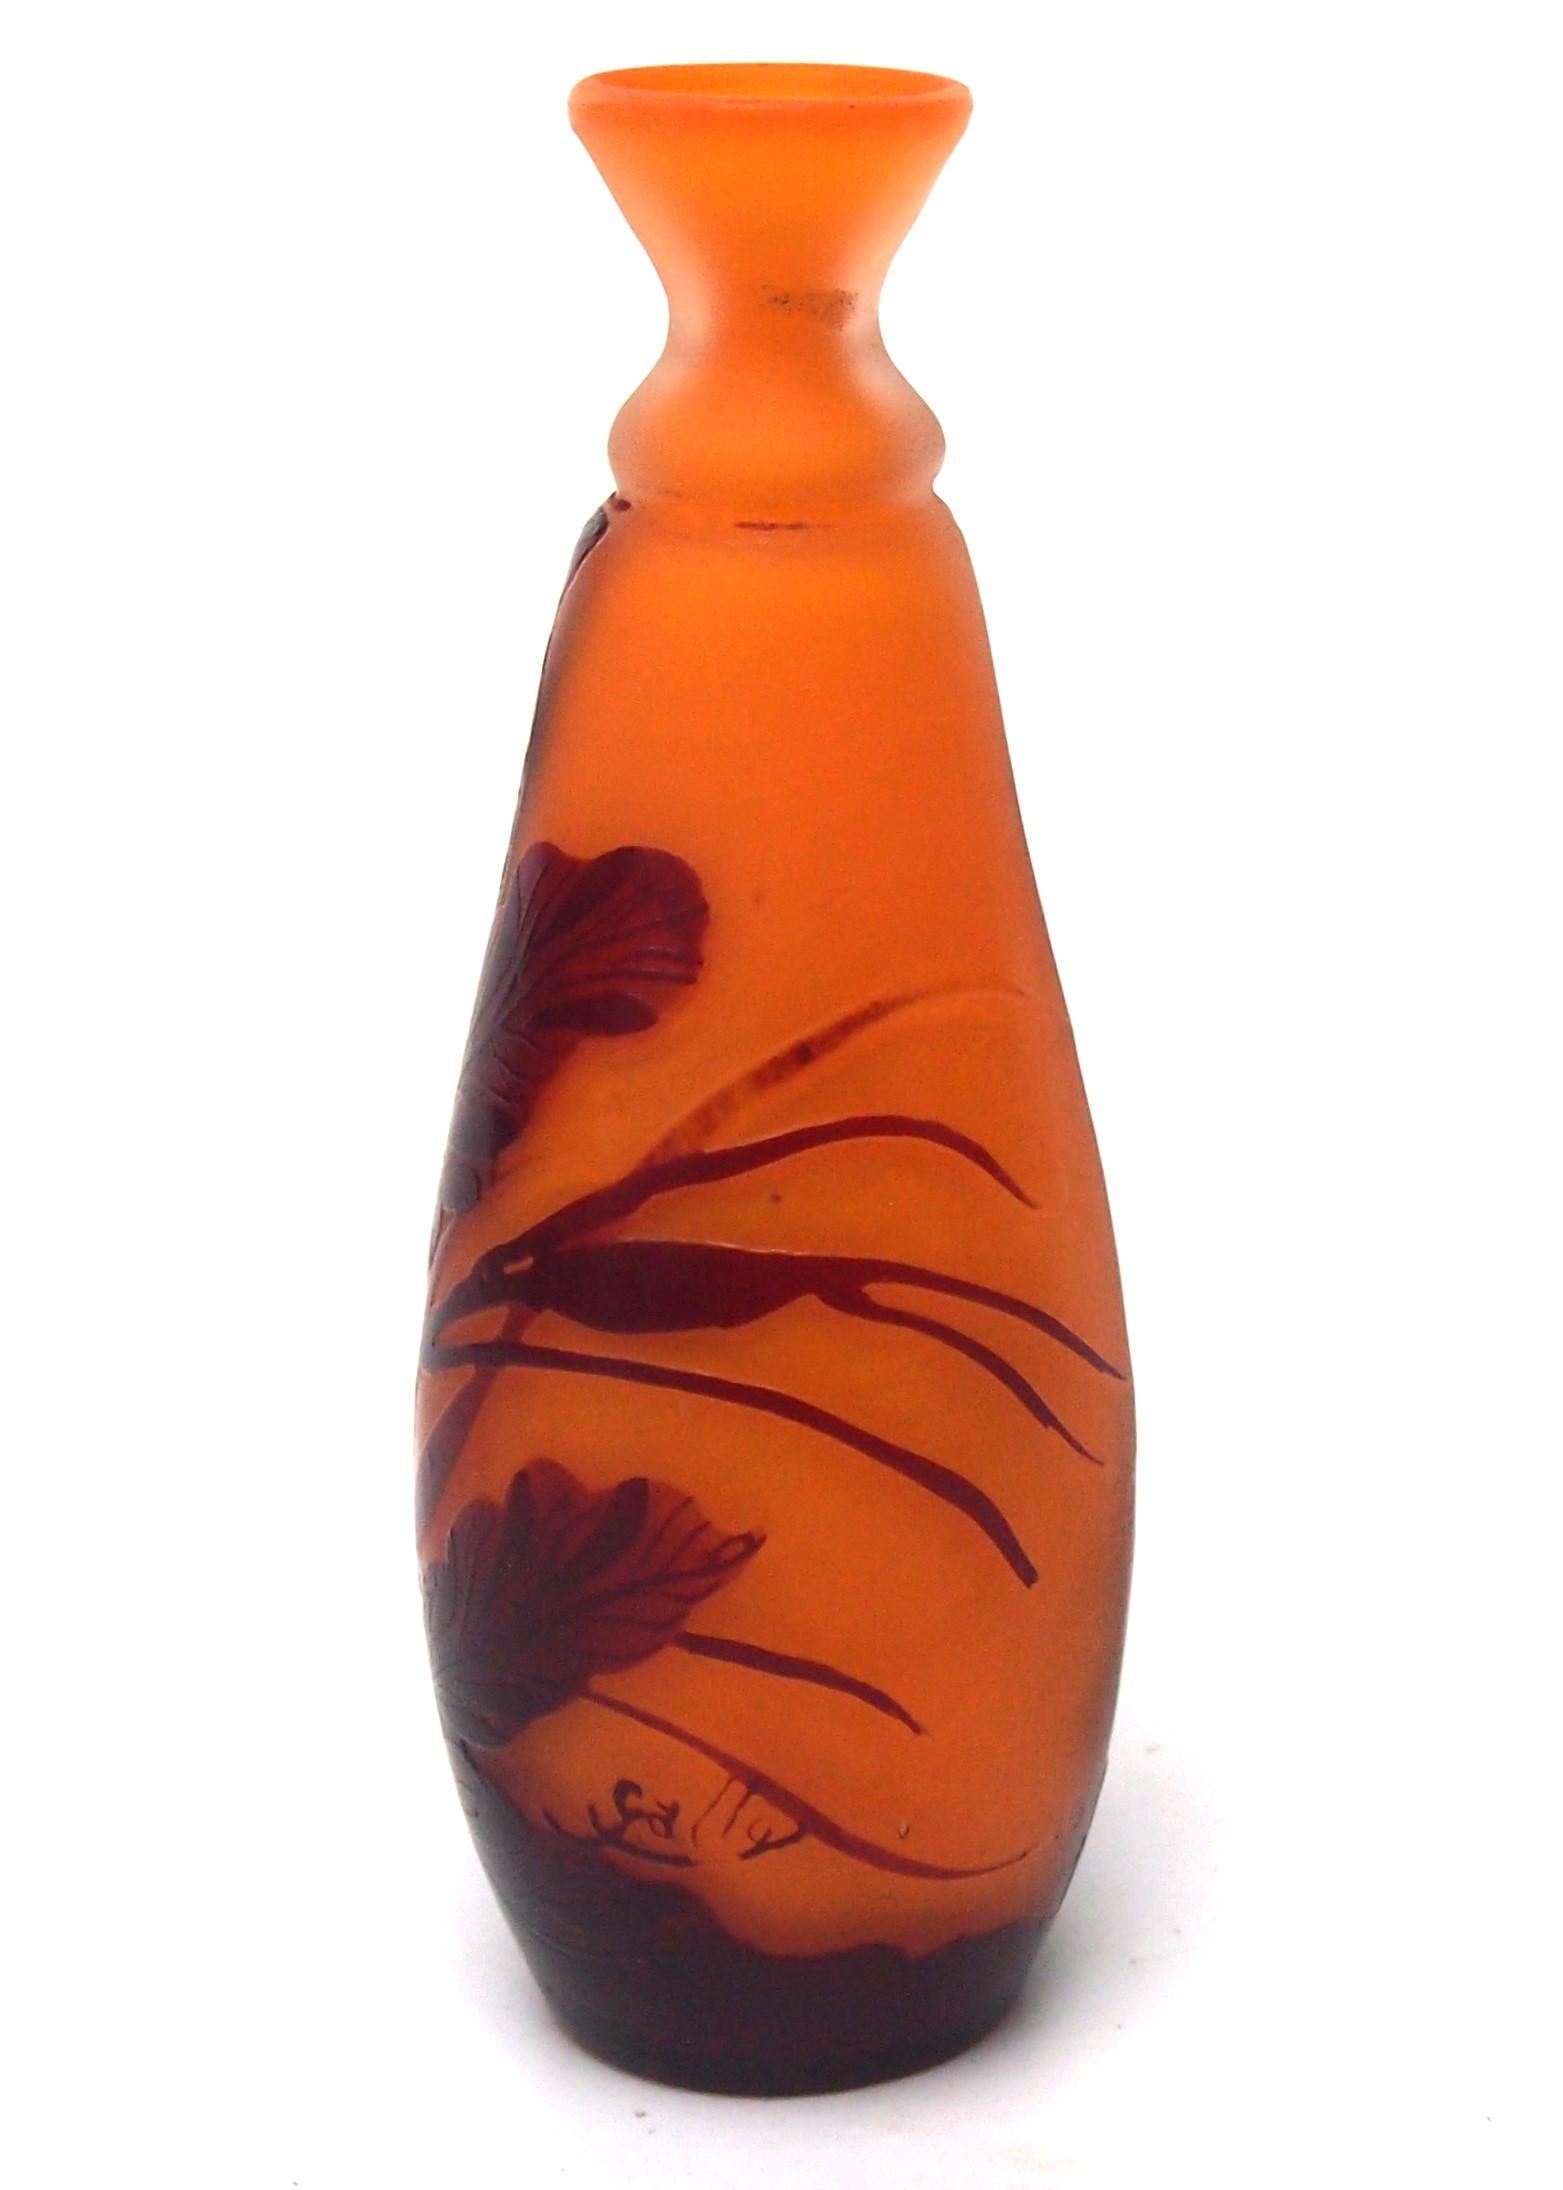 Exceptionally rare war time production Emile Galle cameo vase -in brown over orange. Depicting seaweed. Signed Provost Mk III see last picture for dating chart.

In 1914 War broke out and the Germans attacked the hills above Nancy in the hearing of